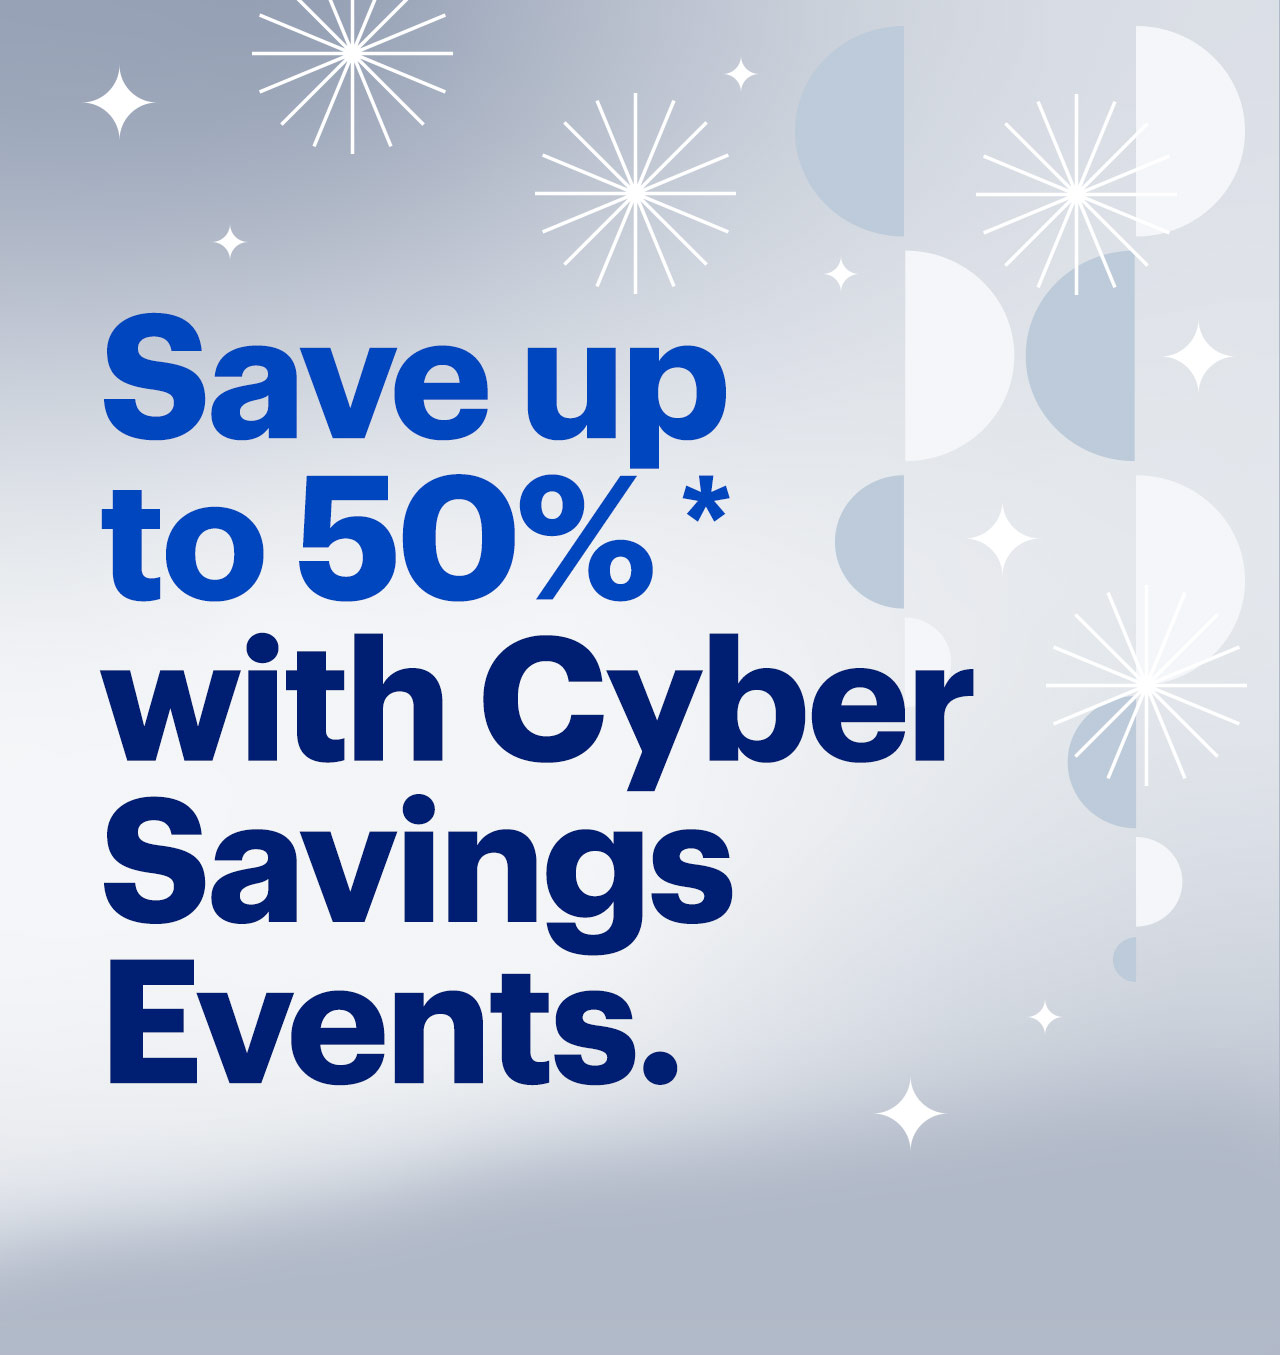 Save up to 50% with Cyber Savings Events. Reference disclaimer. Save up to 50%* with Cyber Savings Events. 